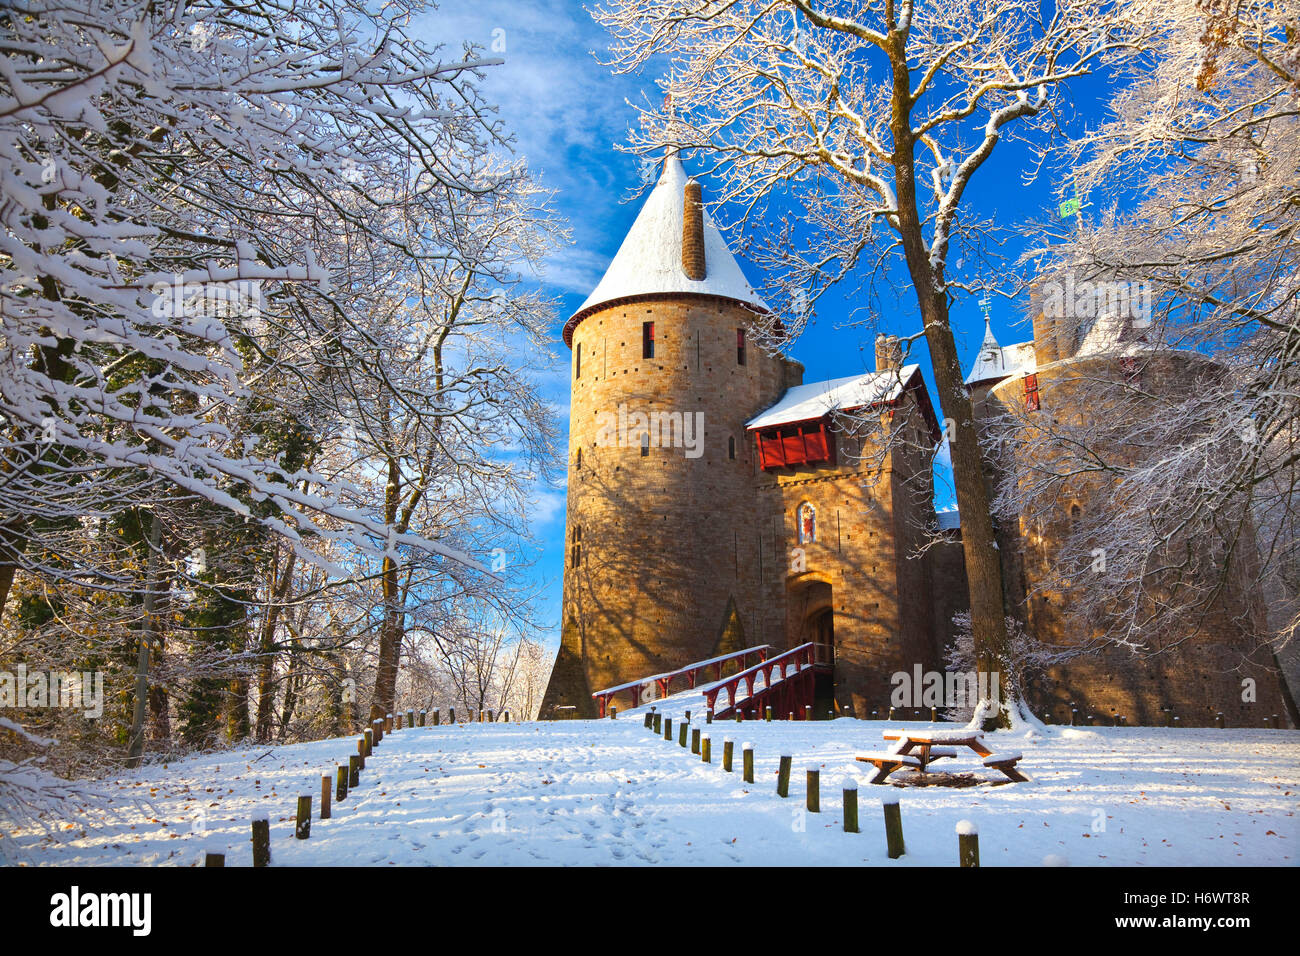 Castle Coch, Castell Coch, The Red Castle, Tongwynlais, Cardiff, Wales, UK Snow Stock Photo